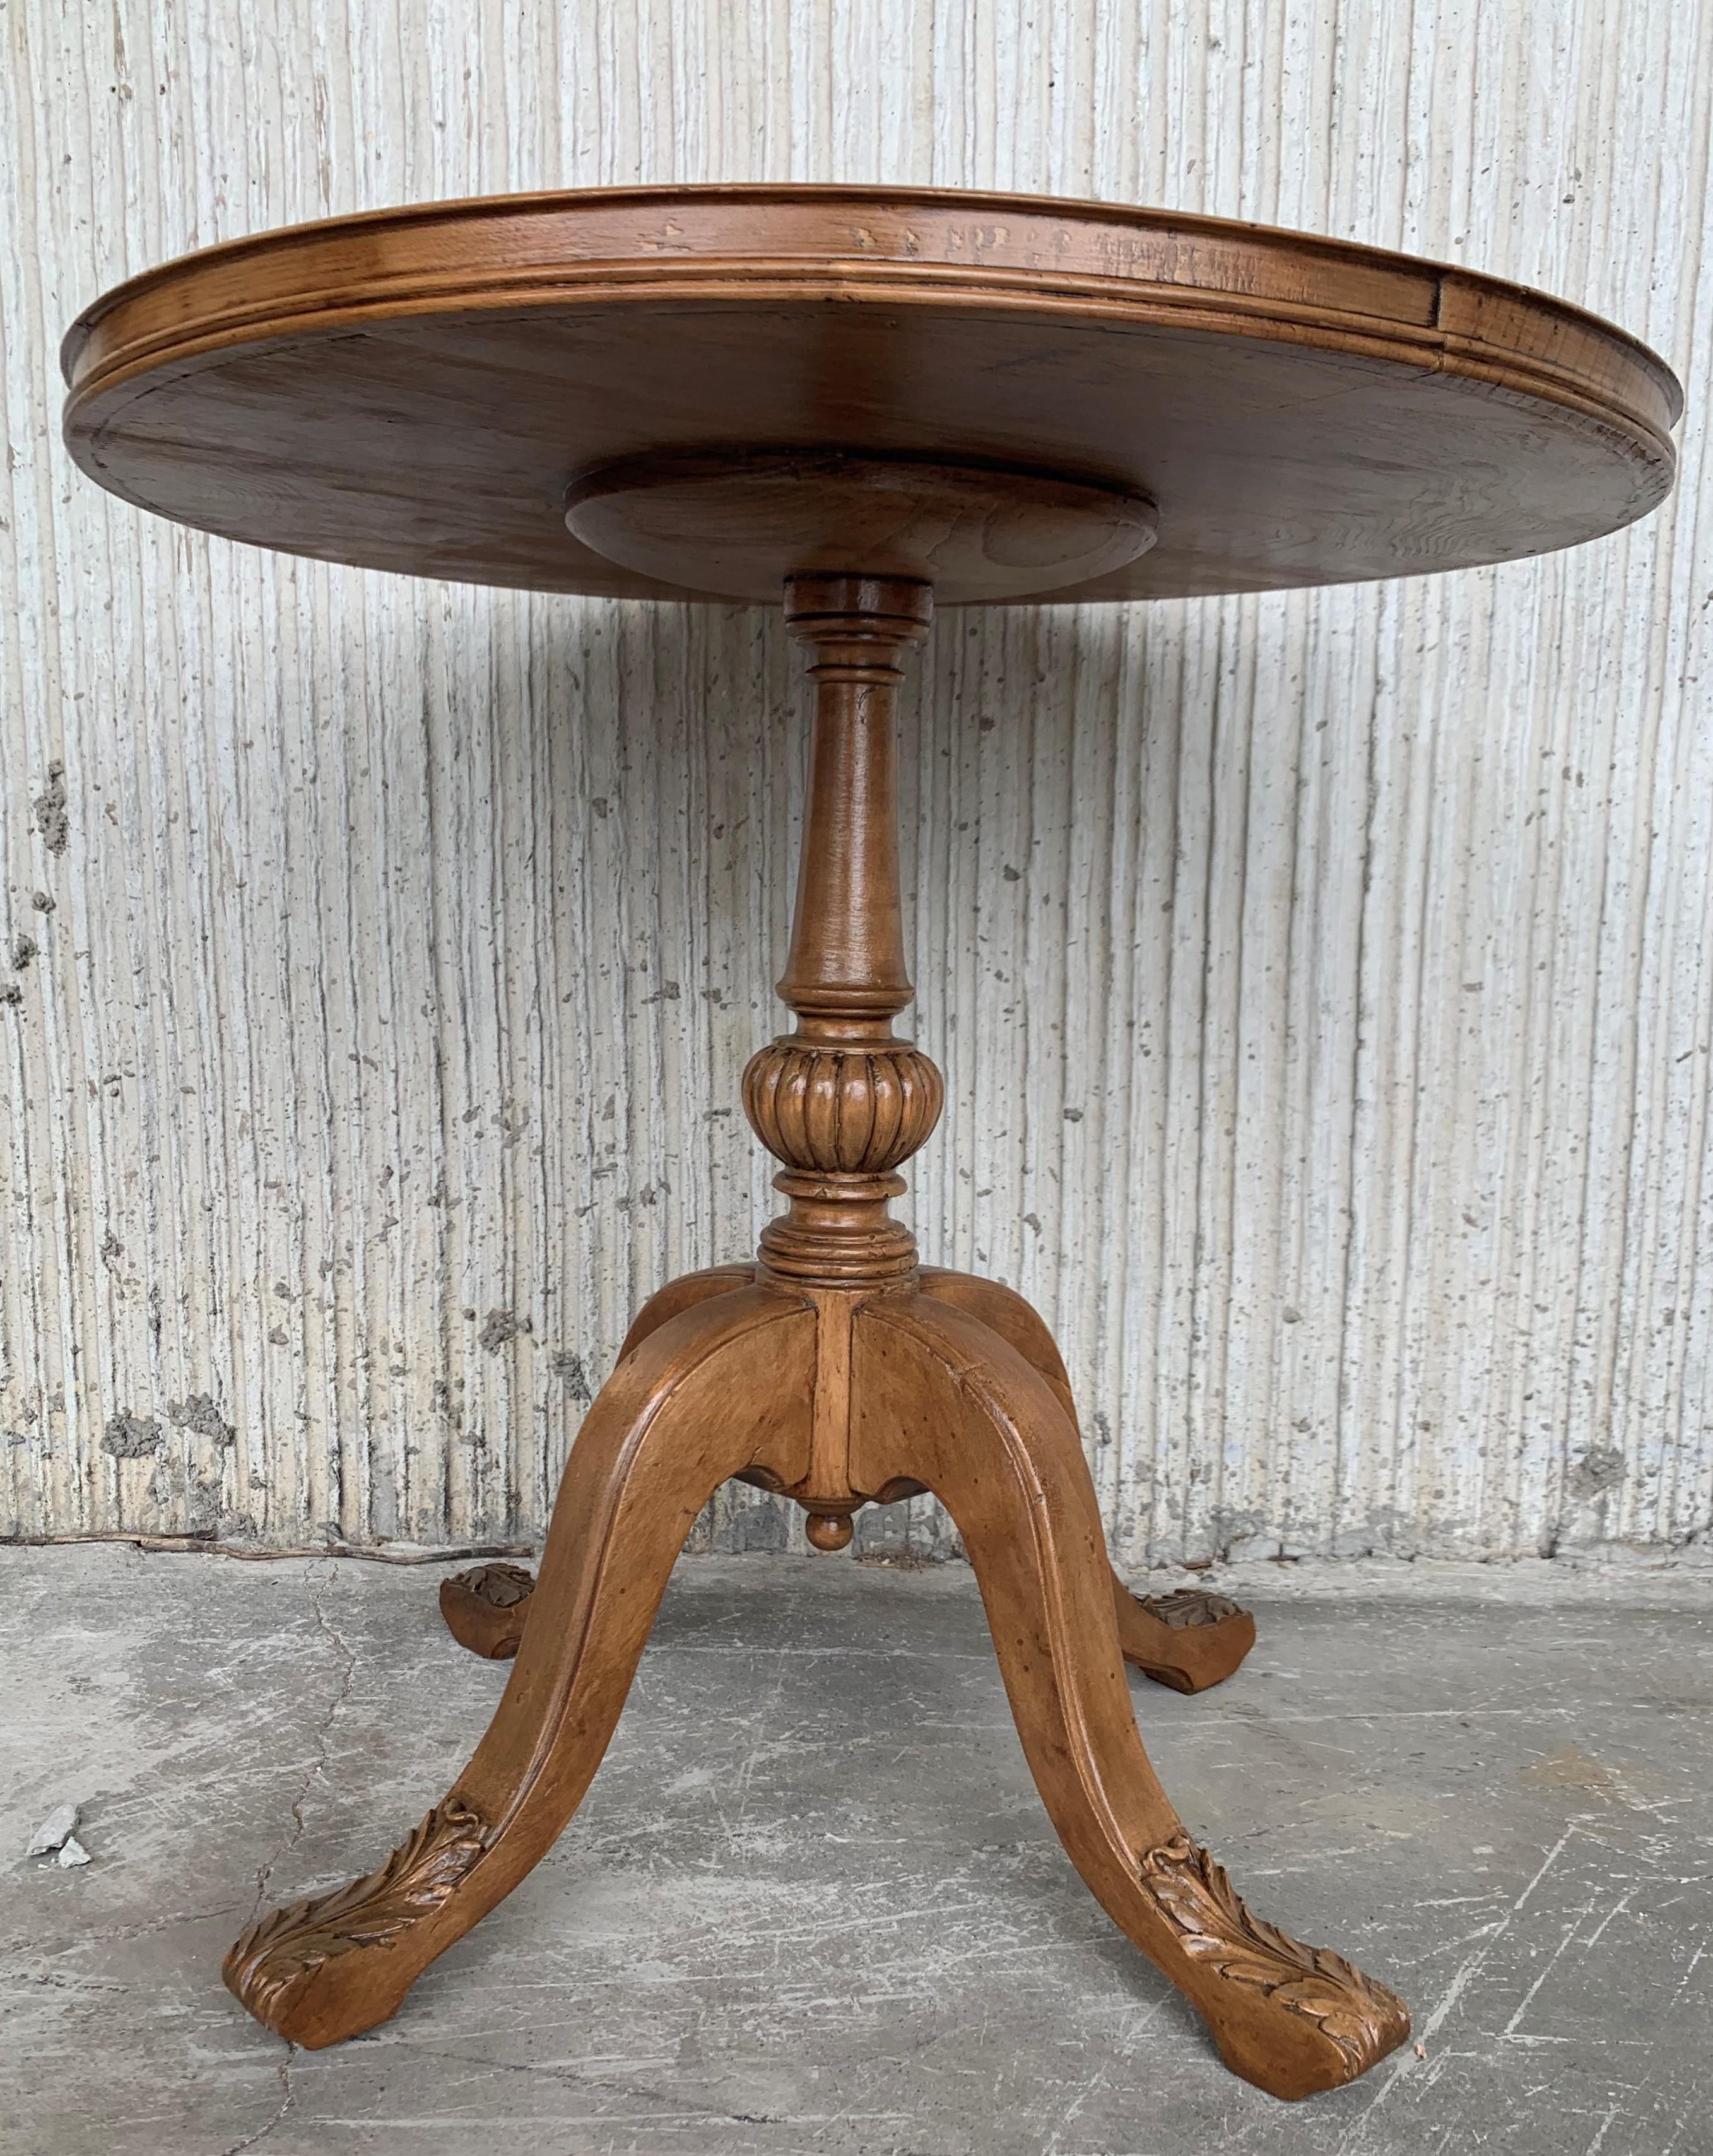 English Pedestal Walnut Round Coffee or Side Table with Ornamental Carved Legs